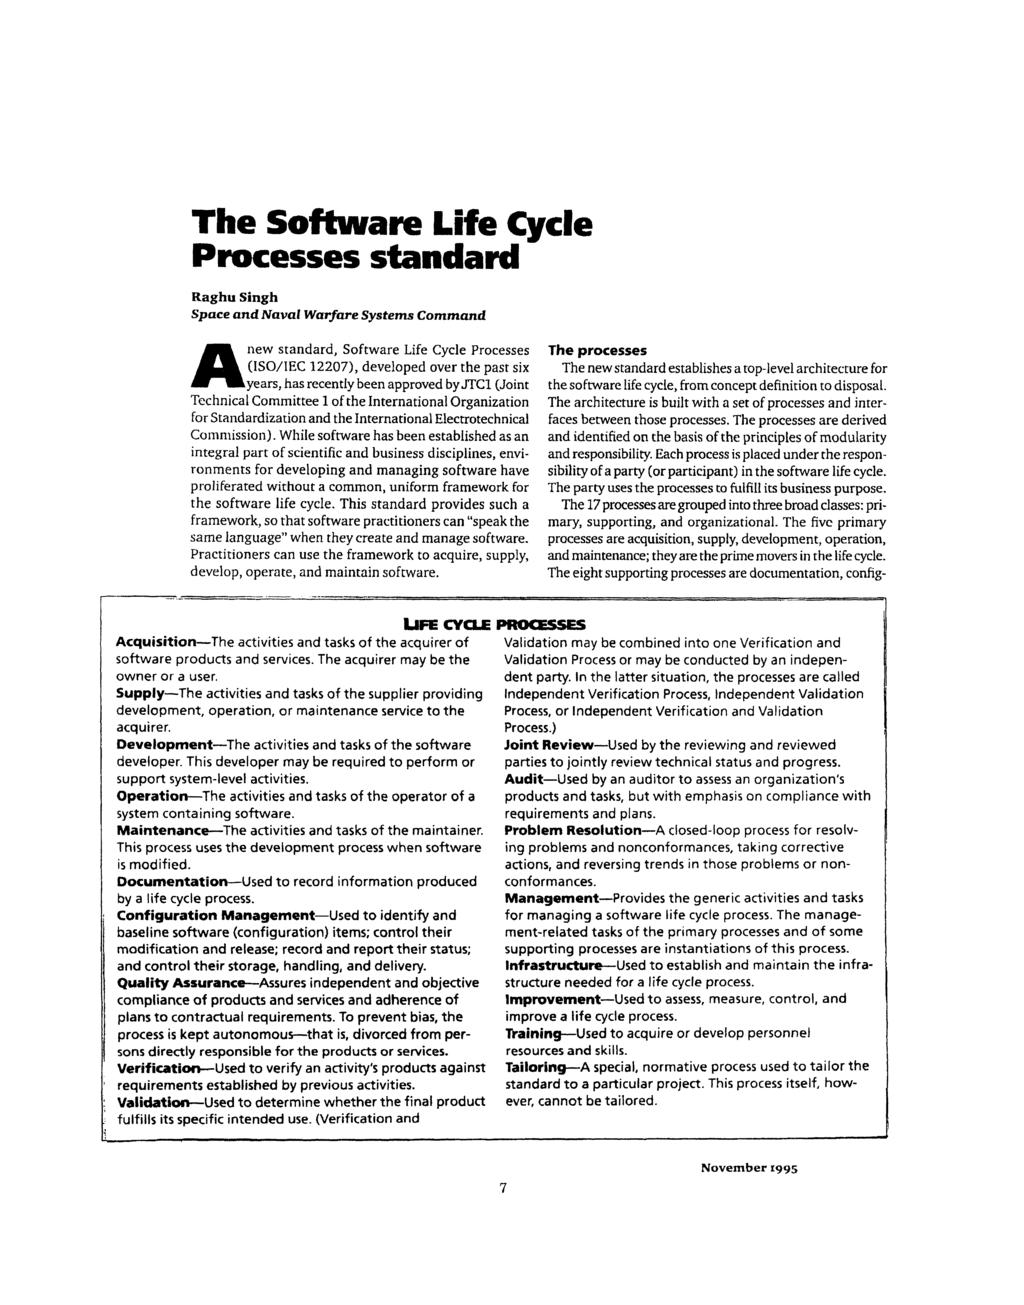 The Software Life Cycle Processes standard Raghu Singh Space and Naval Warfare Systems Command Anew standard, Software Life Cycle Processes (ISO/IEC 12207), developed over the past six years, has